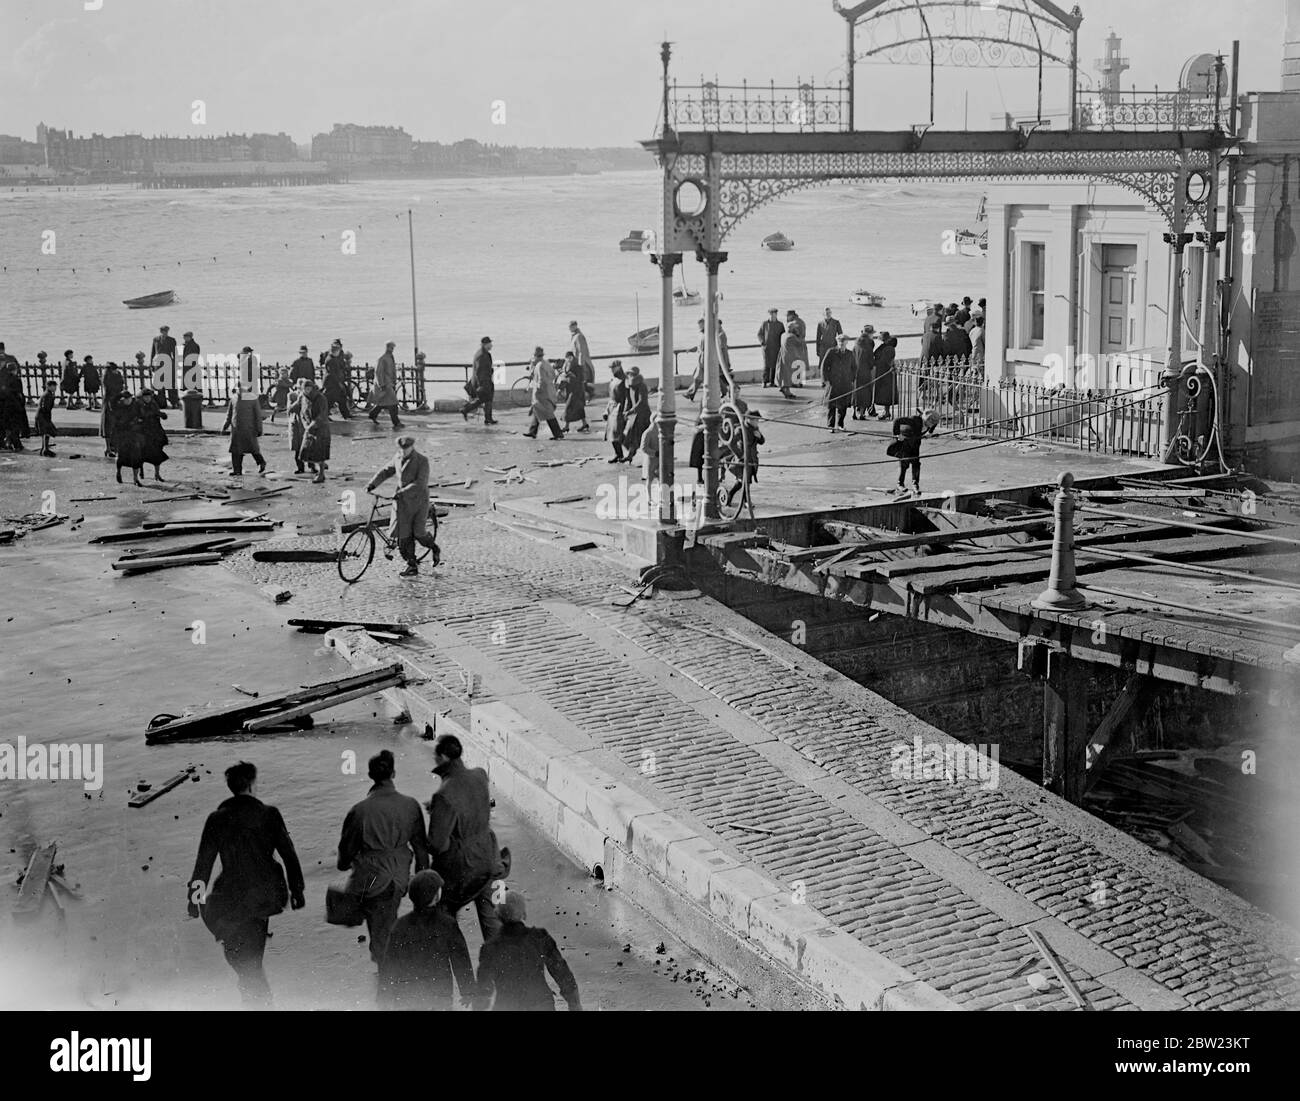 Jetty damaged at Margate by worst Gale and 50 years. Sweeping across the South and East coasts, the worst Gale, the England has known for 50 years, left an immense trial of damage behind. Part of the promenade at Margate was torn up, the jetty smashed, kiosks and bathing huts on the beach were overturned by the winds by the wind and battered by the huge seas that smashed over the front. Photo shows, the damaged jetty at Margate, showing the broken woodwork scattered over the front today (Sunday). 13 February 1938 Stock Photo